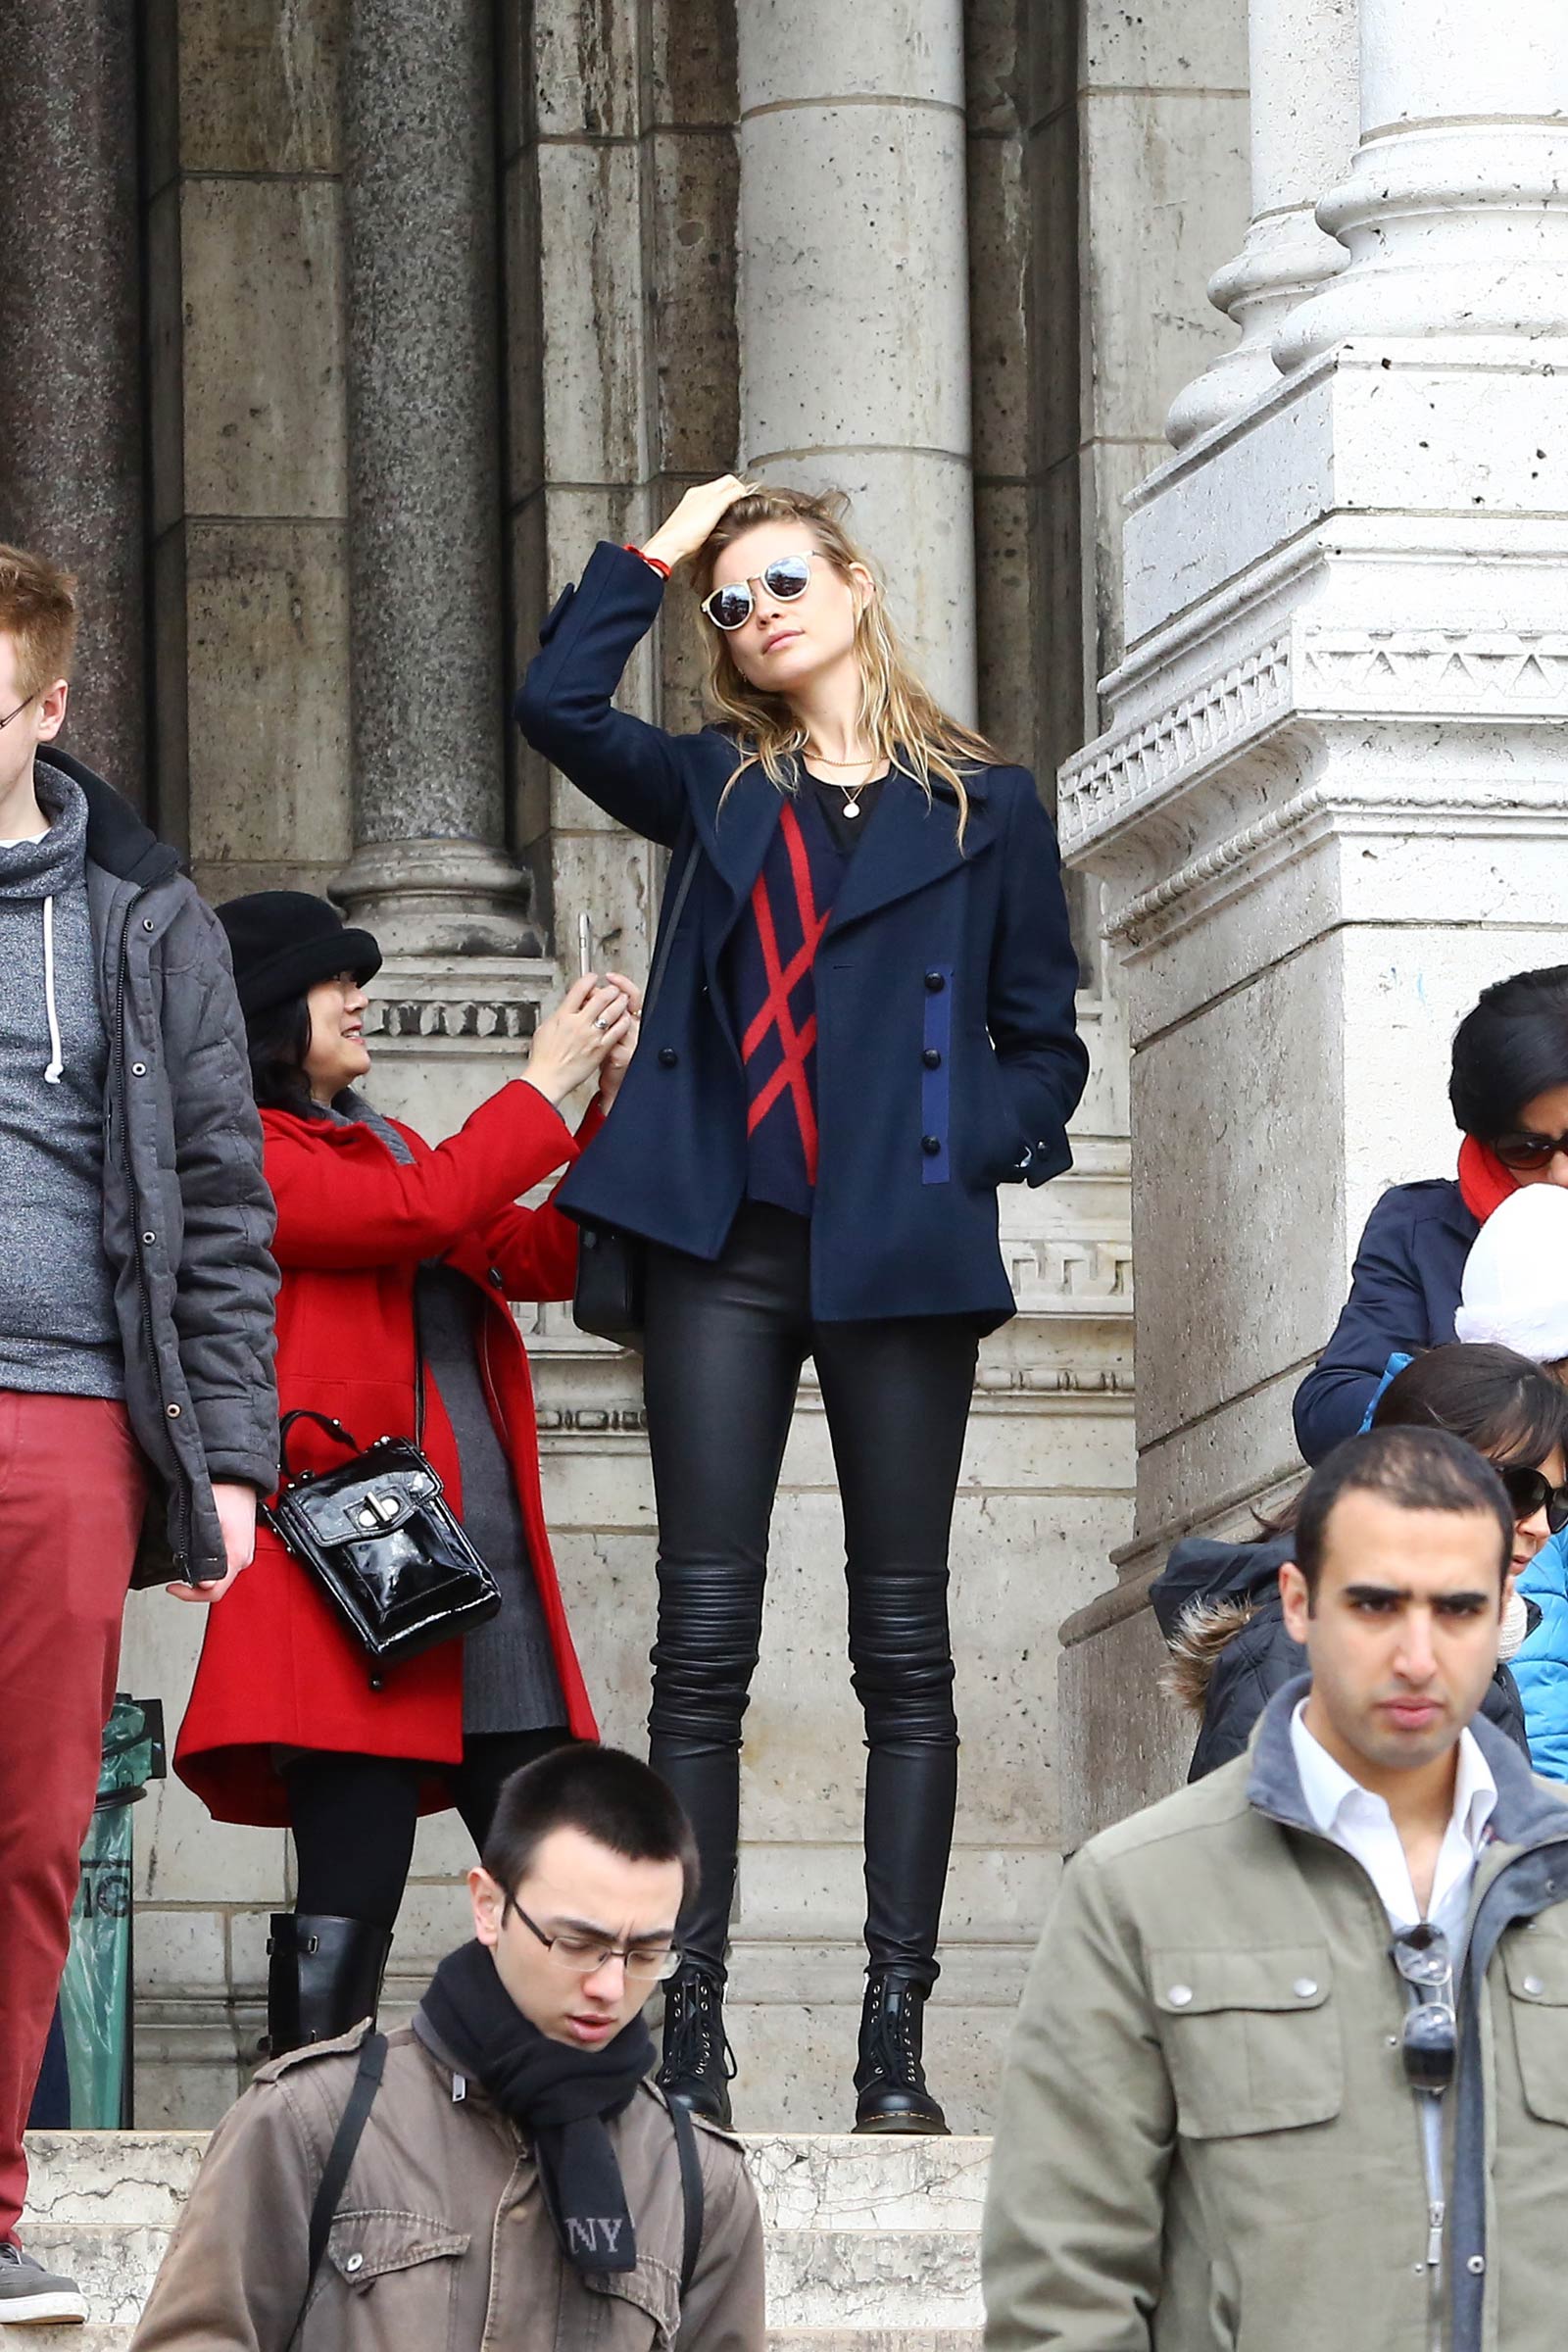 Behati Prinsloo out and about in Paris